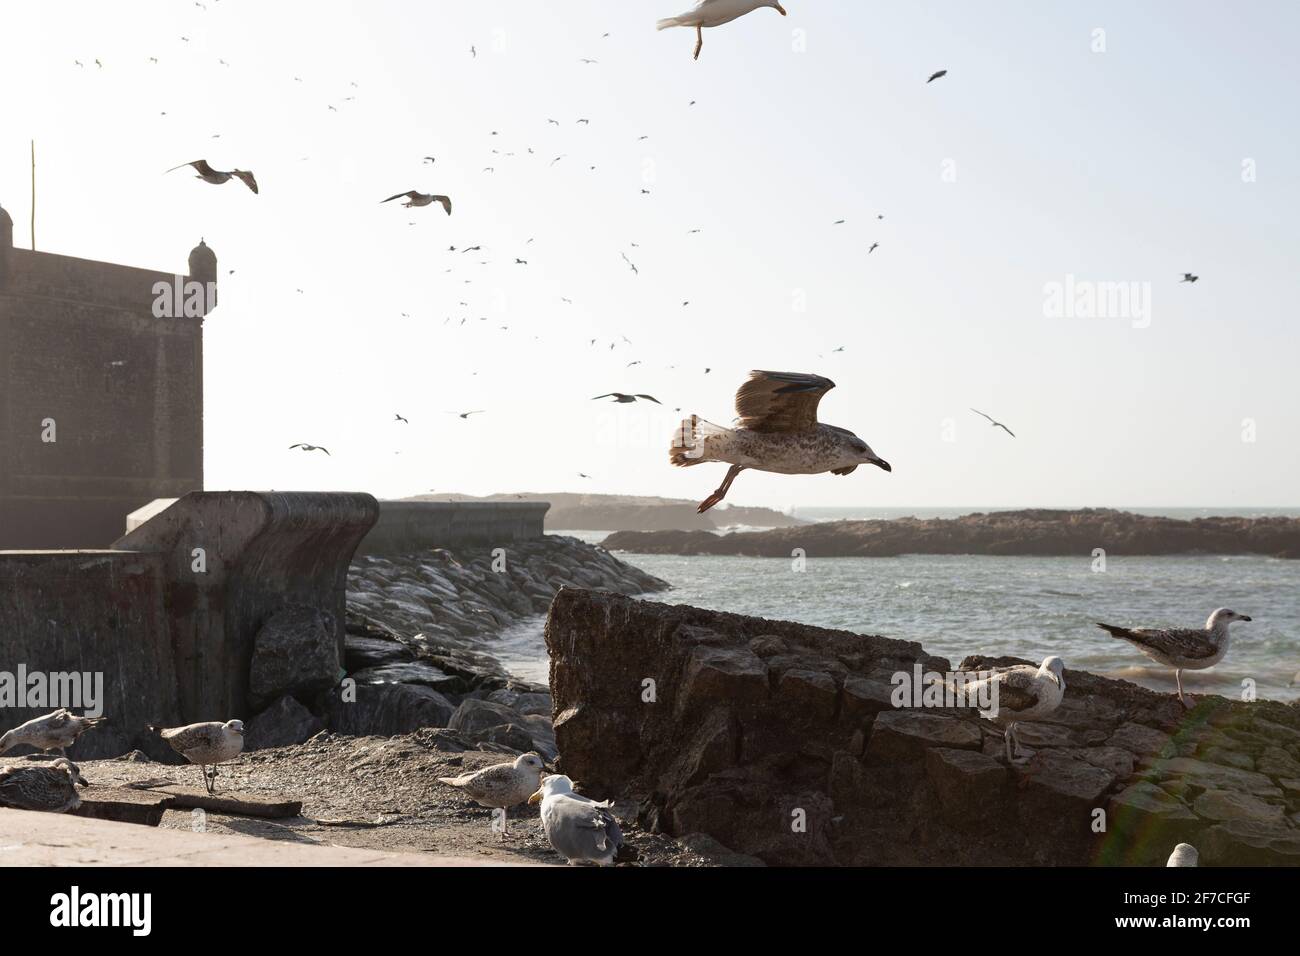 Seagulls flying at the port of Essaouira, Morocco Stock Photo